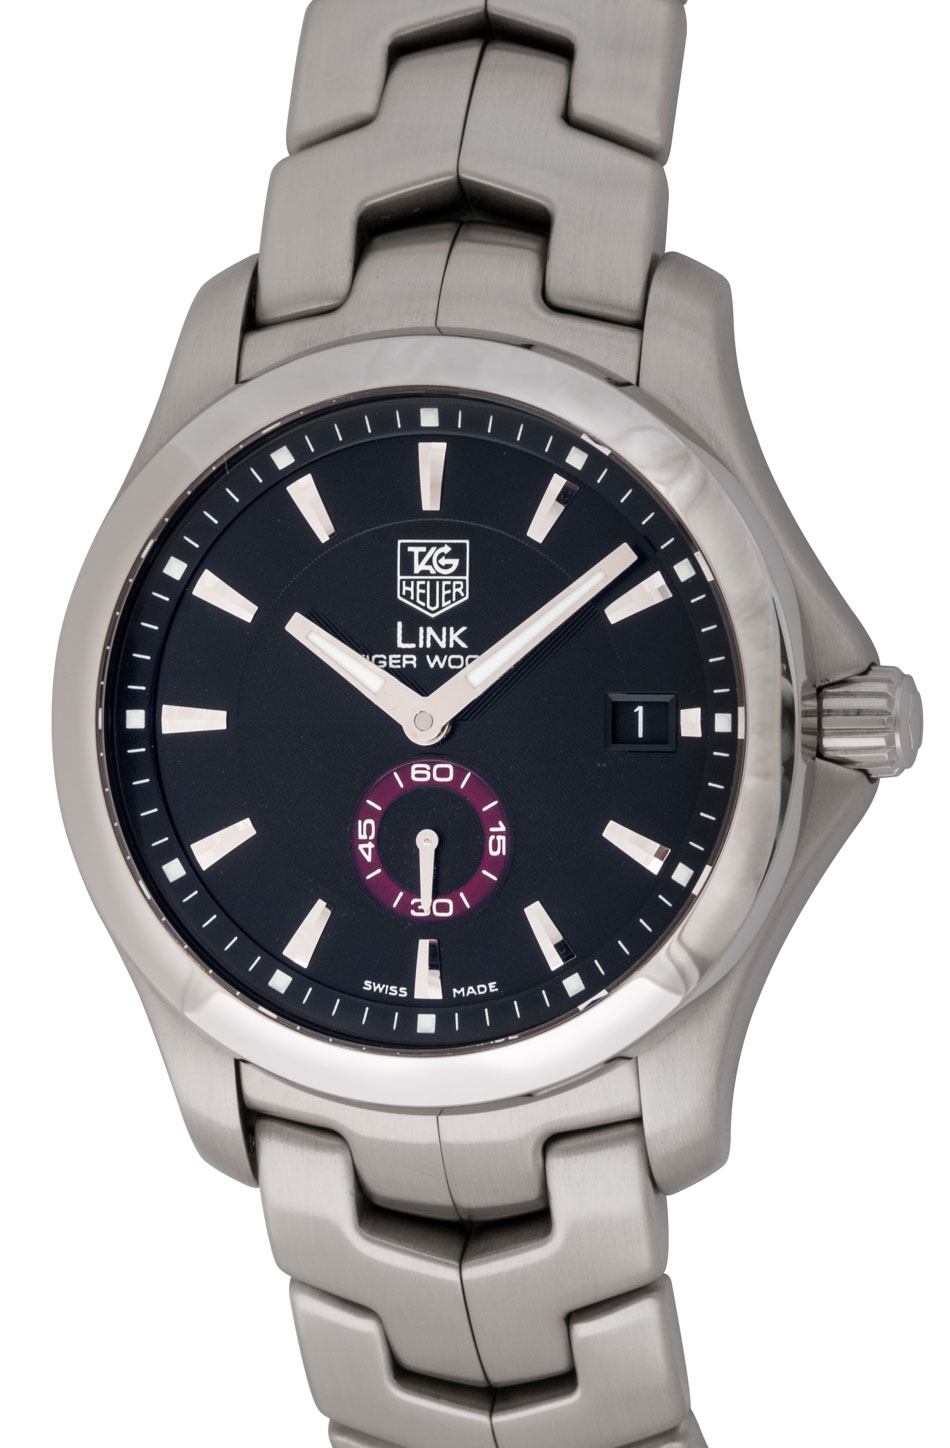 TAG Heuer - Link 'Tiger Woods' : WJ2110.BA0570 : SOLD OUT : black dial